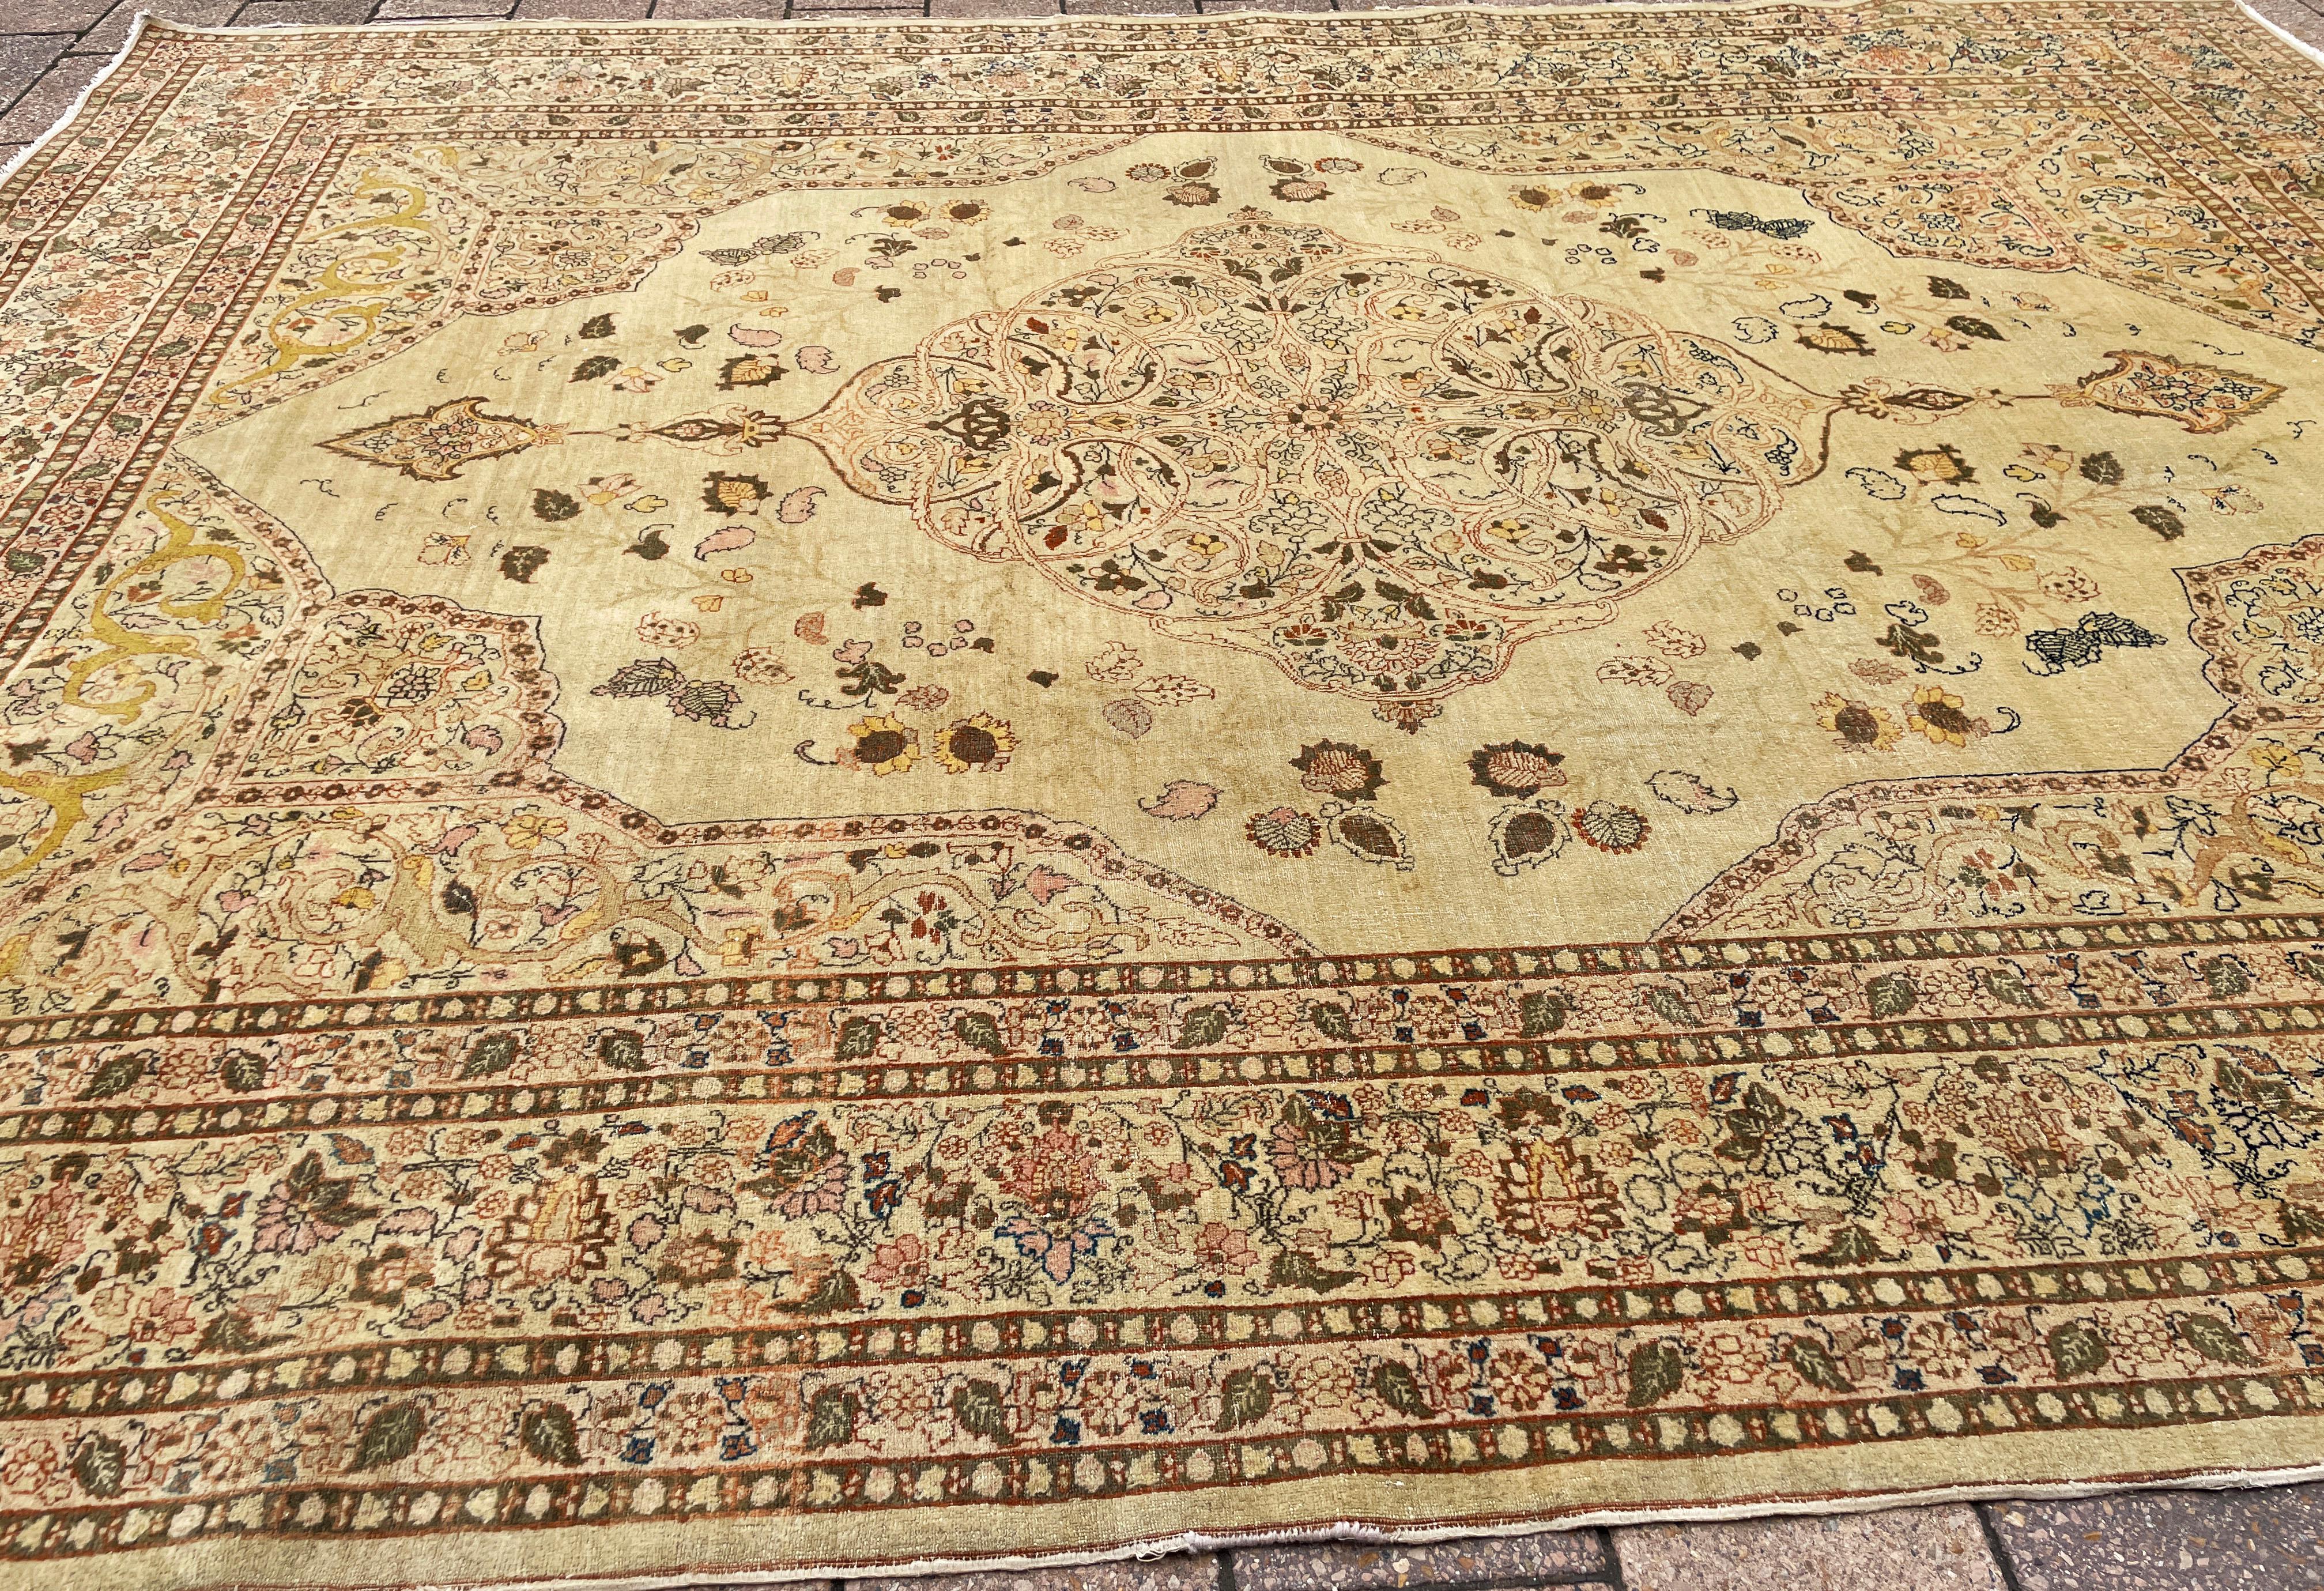 Hand-Knotted Antique Persian Tabriz Hajji Jalili Carpet, The Best Of Persian Rugs For Sale